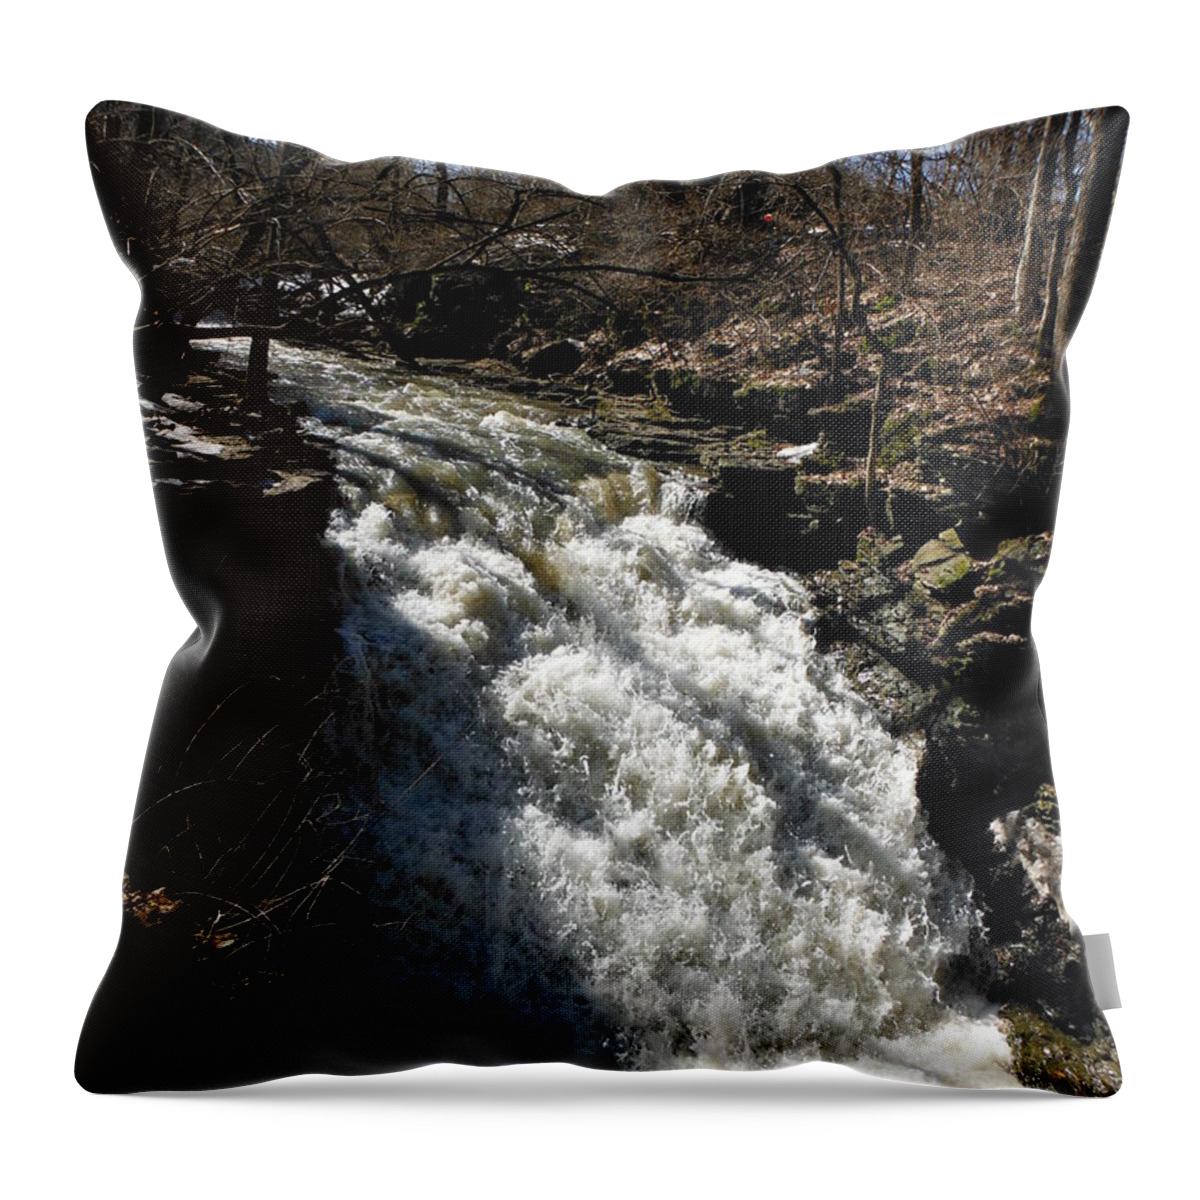 Indian Run Waterfall With February Snow Melt Throw Pillow featuring the photograph Indian Run Waterfall With February Snow Melt 1 by Paddy Shaffer